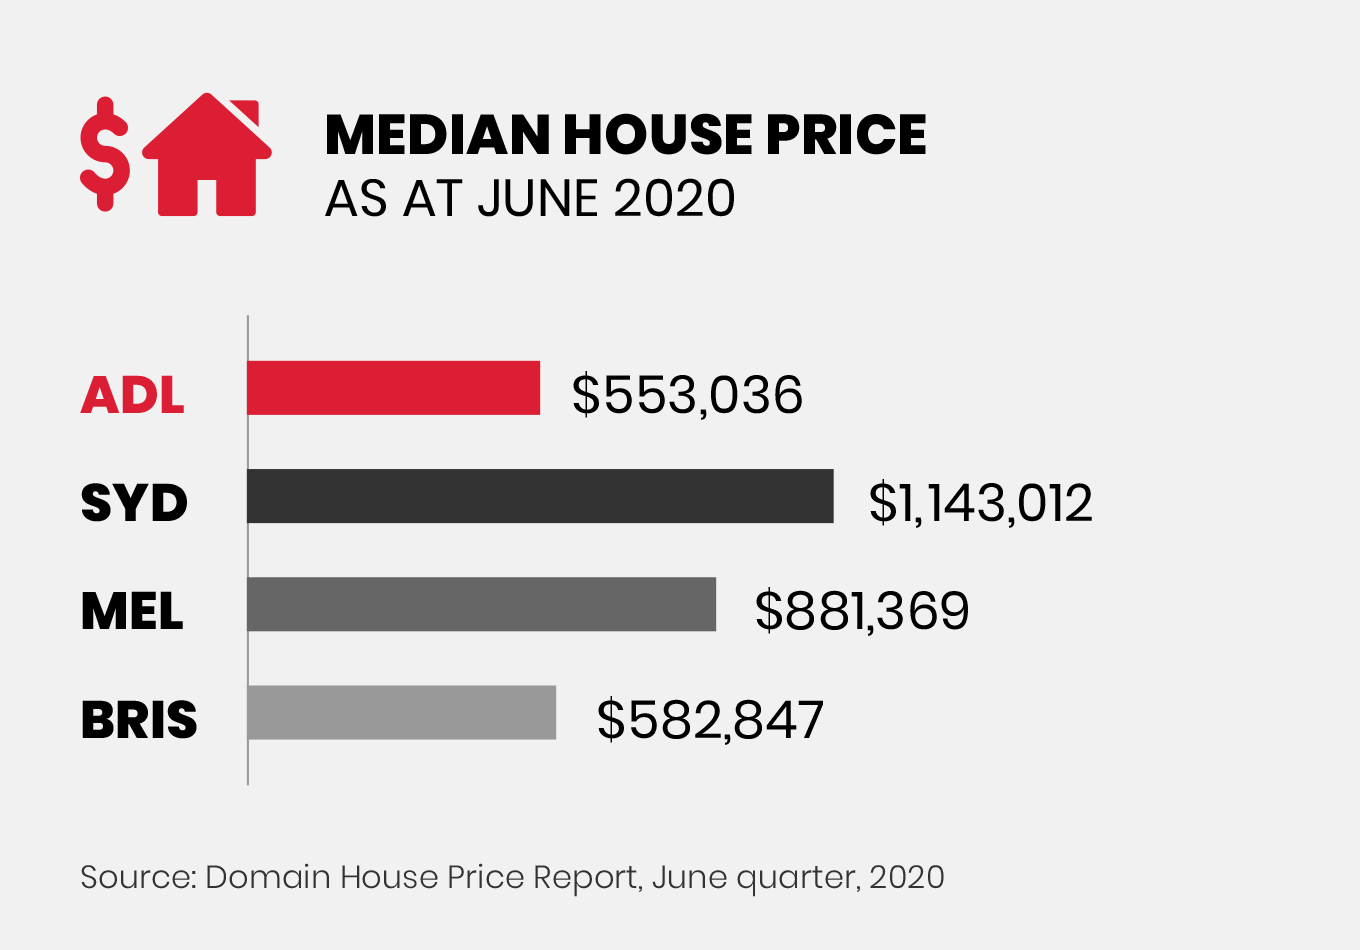 Adelaide Median House Price Comparison